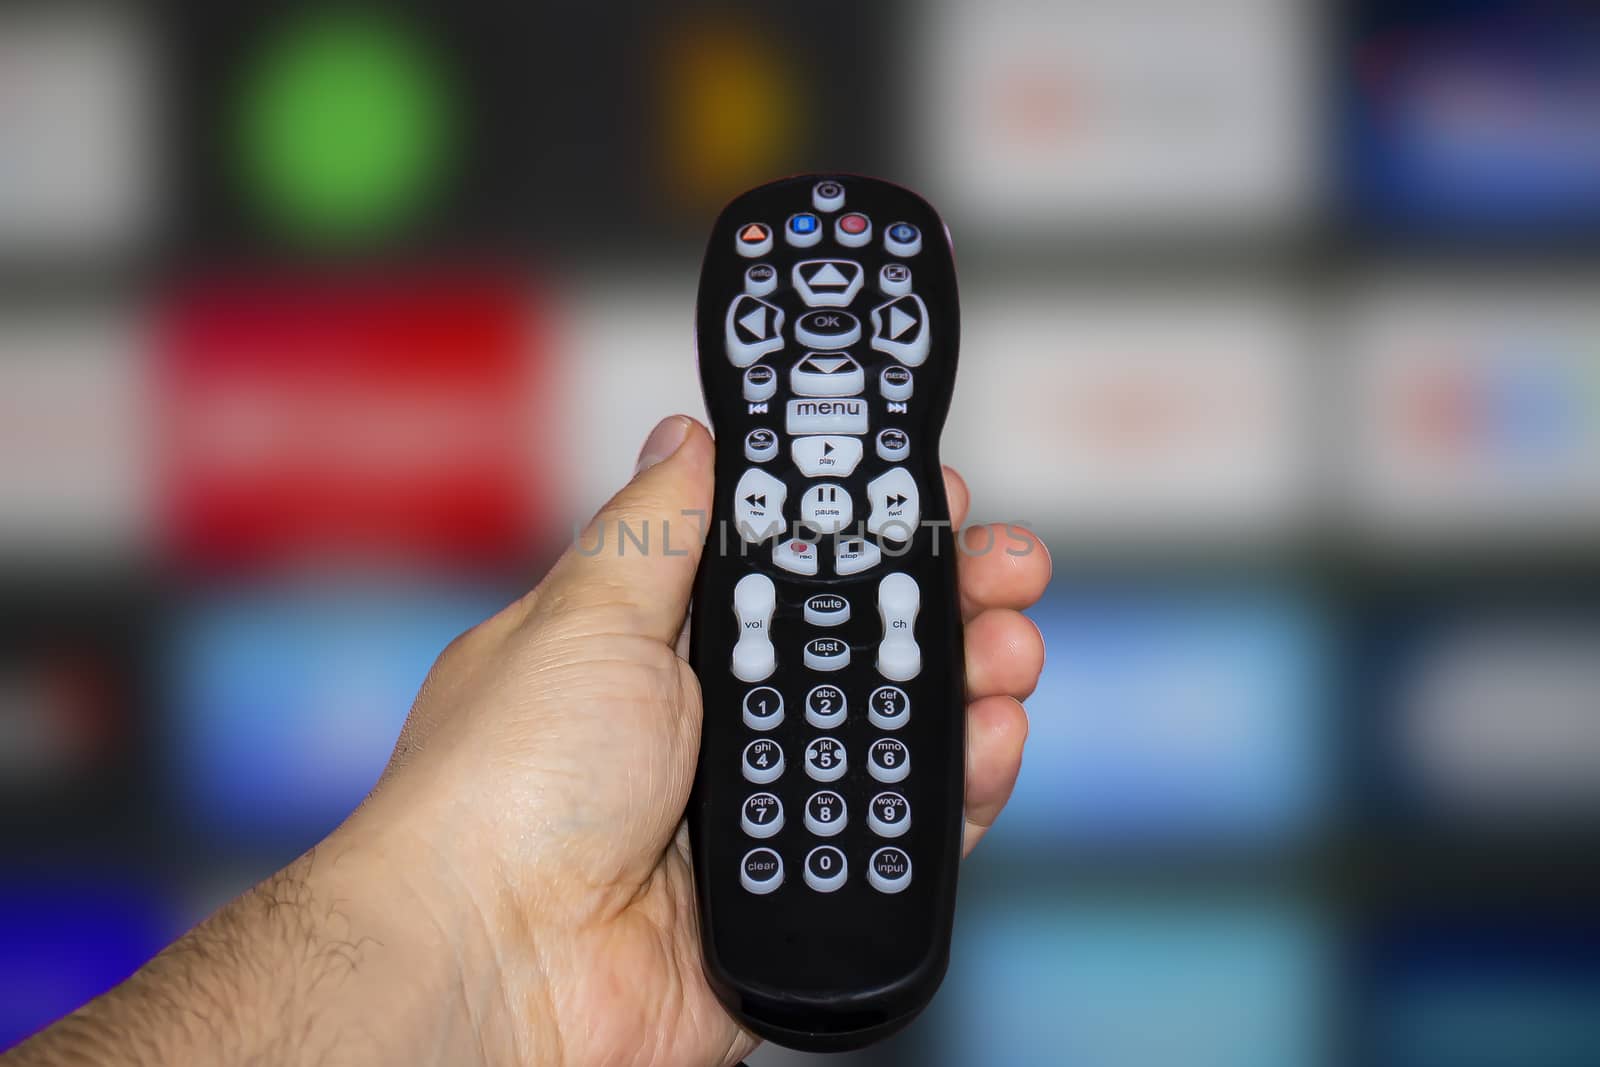 A person holding a control remote with a television screen on the background